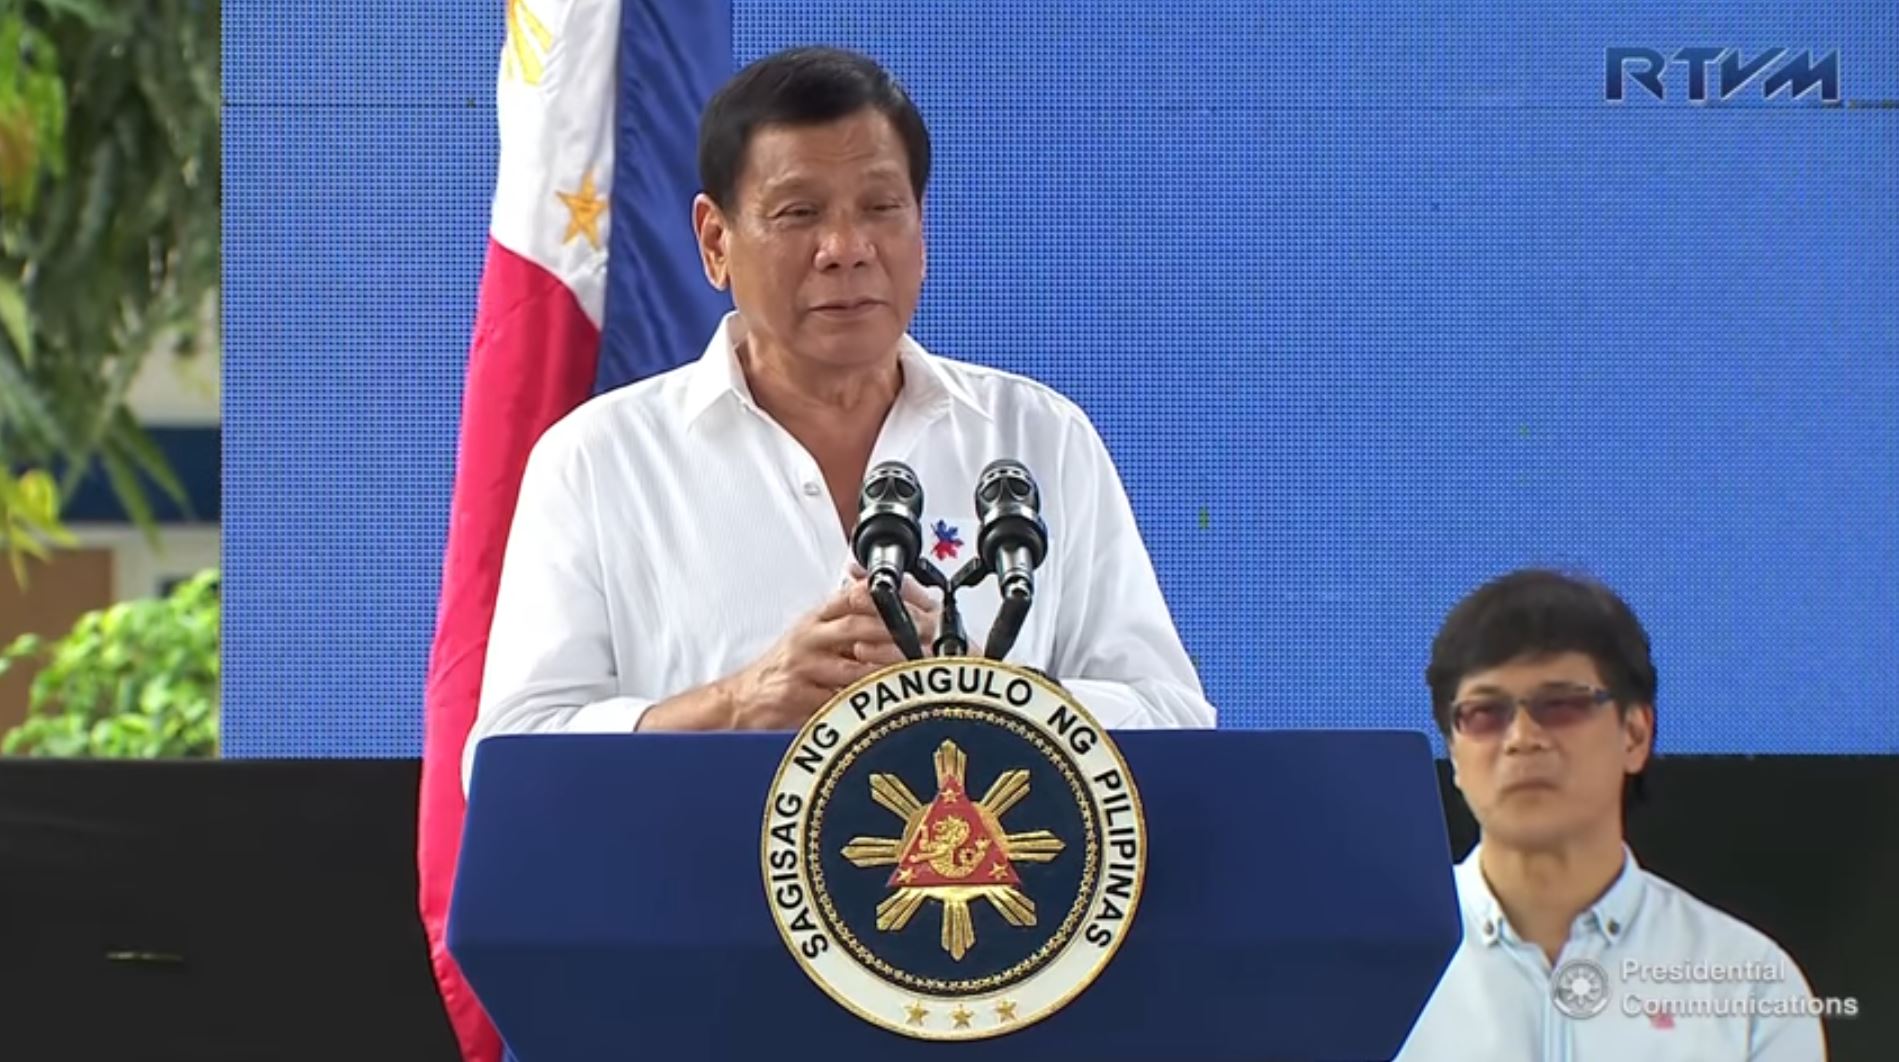 President Duterte giving a speech in Mandaluyong on Wednesday (December 7, to commemmorate the Urban Poor Solidarity Week. It was during his speech that he clarified his instructions to cops, reminding them on the proper rules for police engagement. (Photo grabbed from RTVM video)